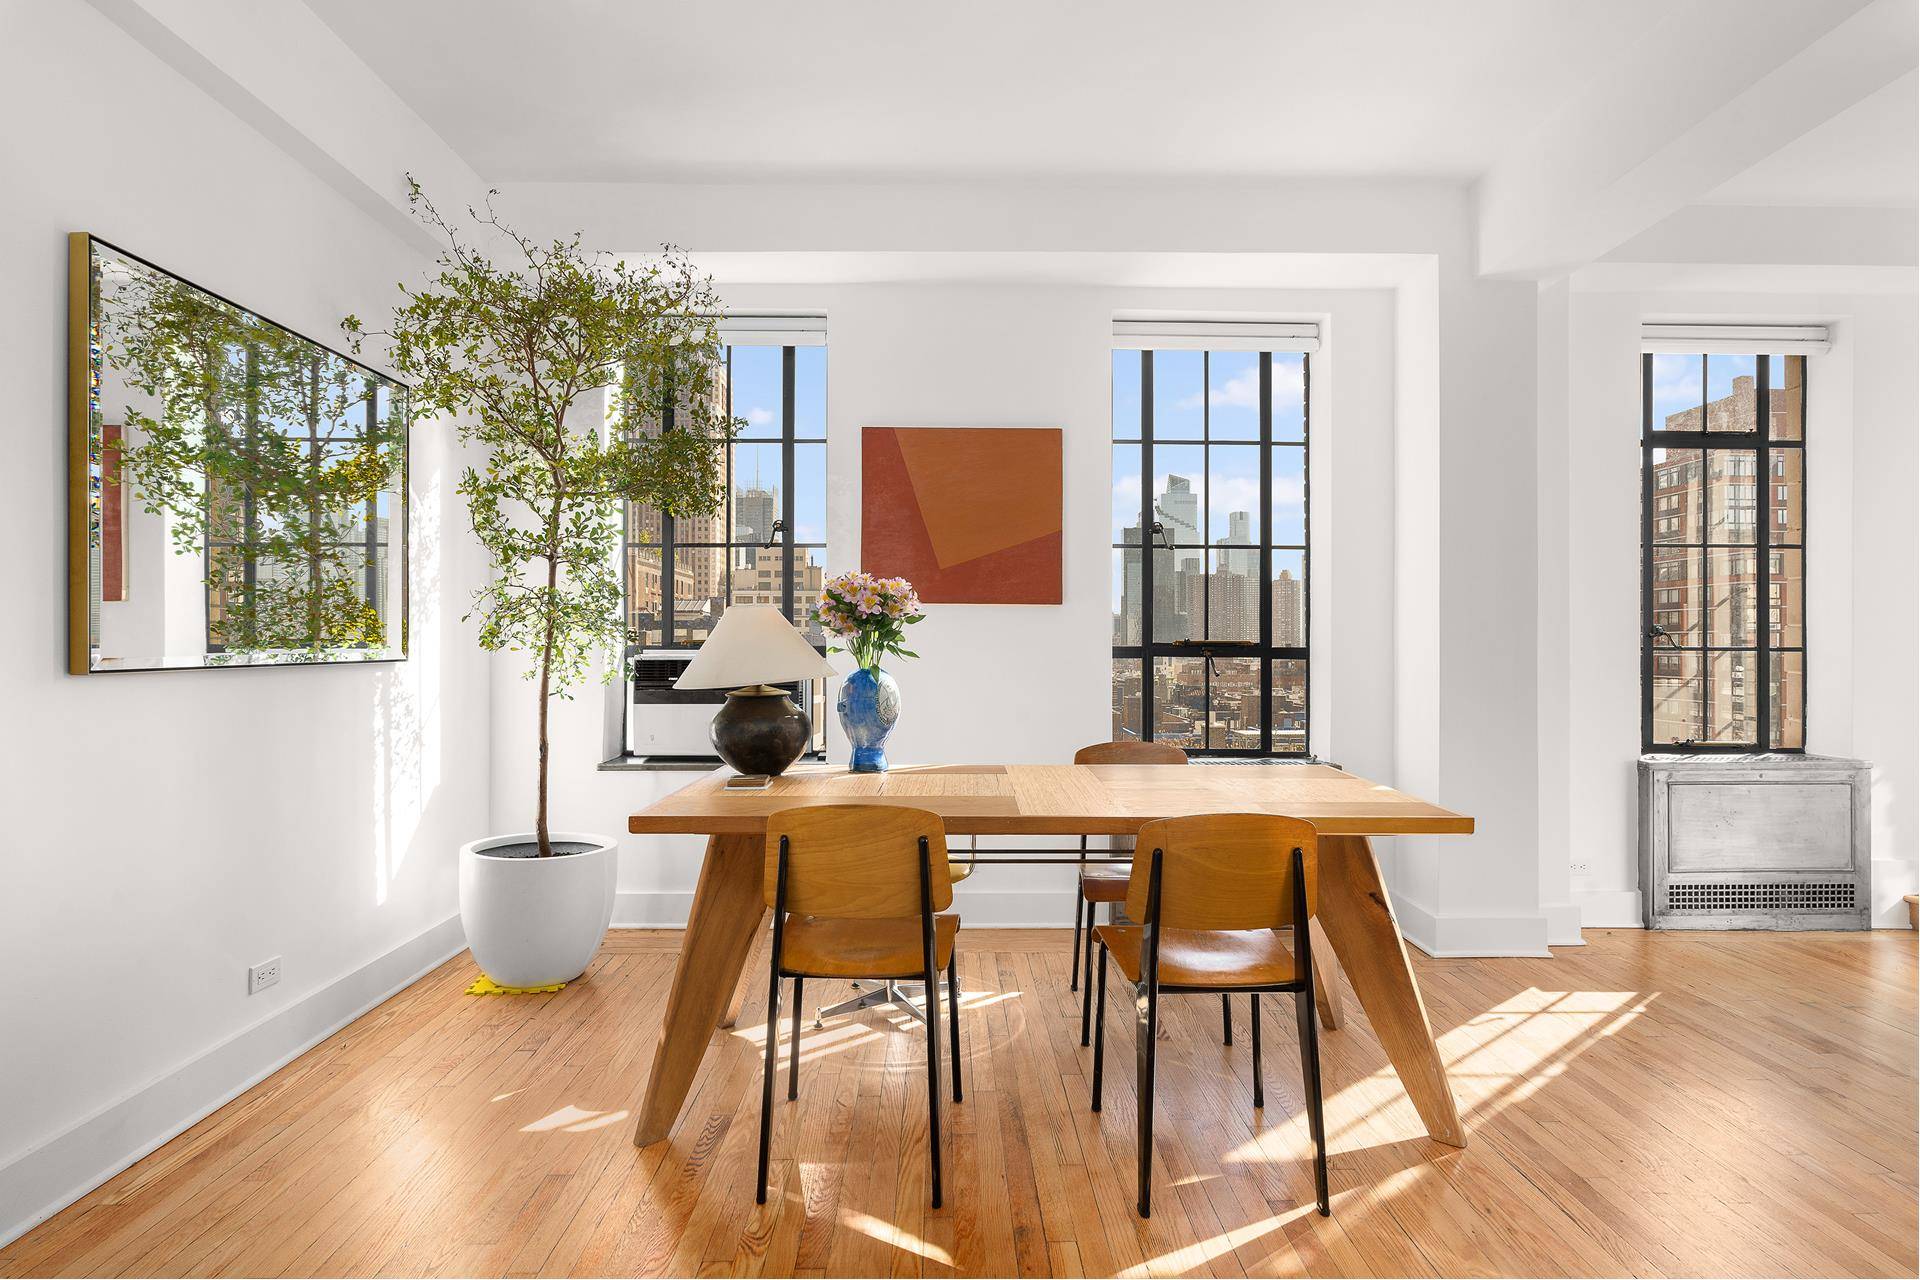 CALLING ALL TERRCE LOVERSBathed in natural light, this stunningly renovated 1, 086 Sq Ft, 1 bedroom residence is situated within a pristine 1931 full service condominium off Columbus Circle.